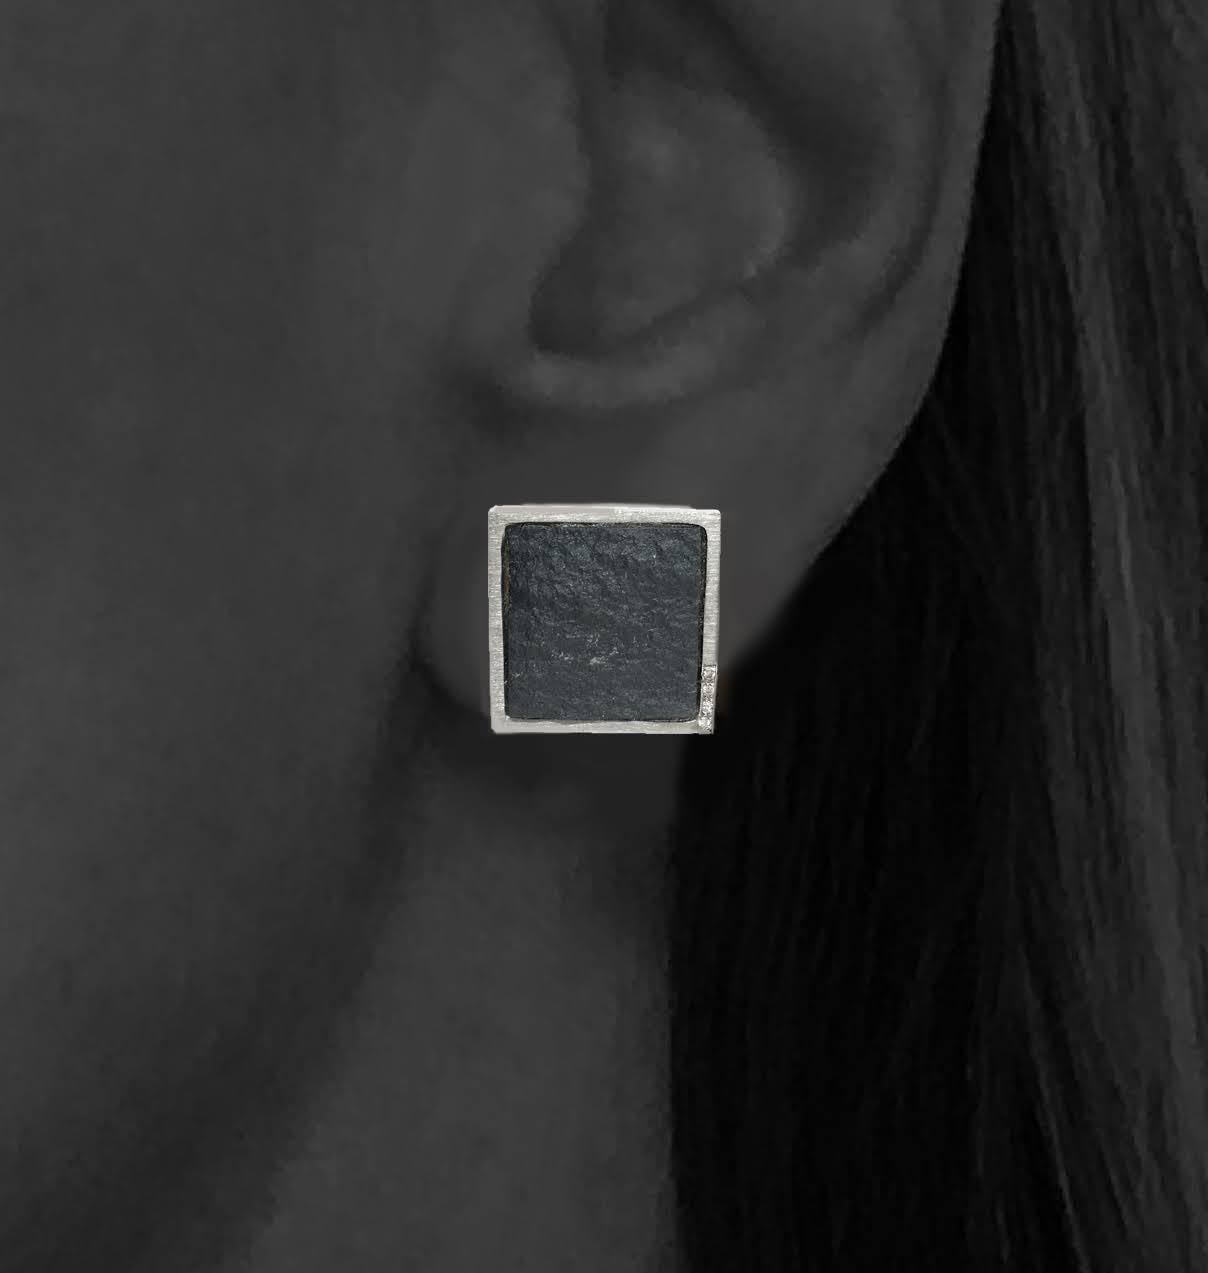 One-of-a-kind. Rough meets refined in these unusual Diamond Pave' in White Gold on Rough Hematite Square Stud Earrings. These scrumptious squares are set in a 14k white gold bezel as stud earrings with a center post and each contain approximately